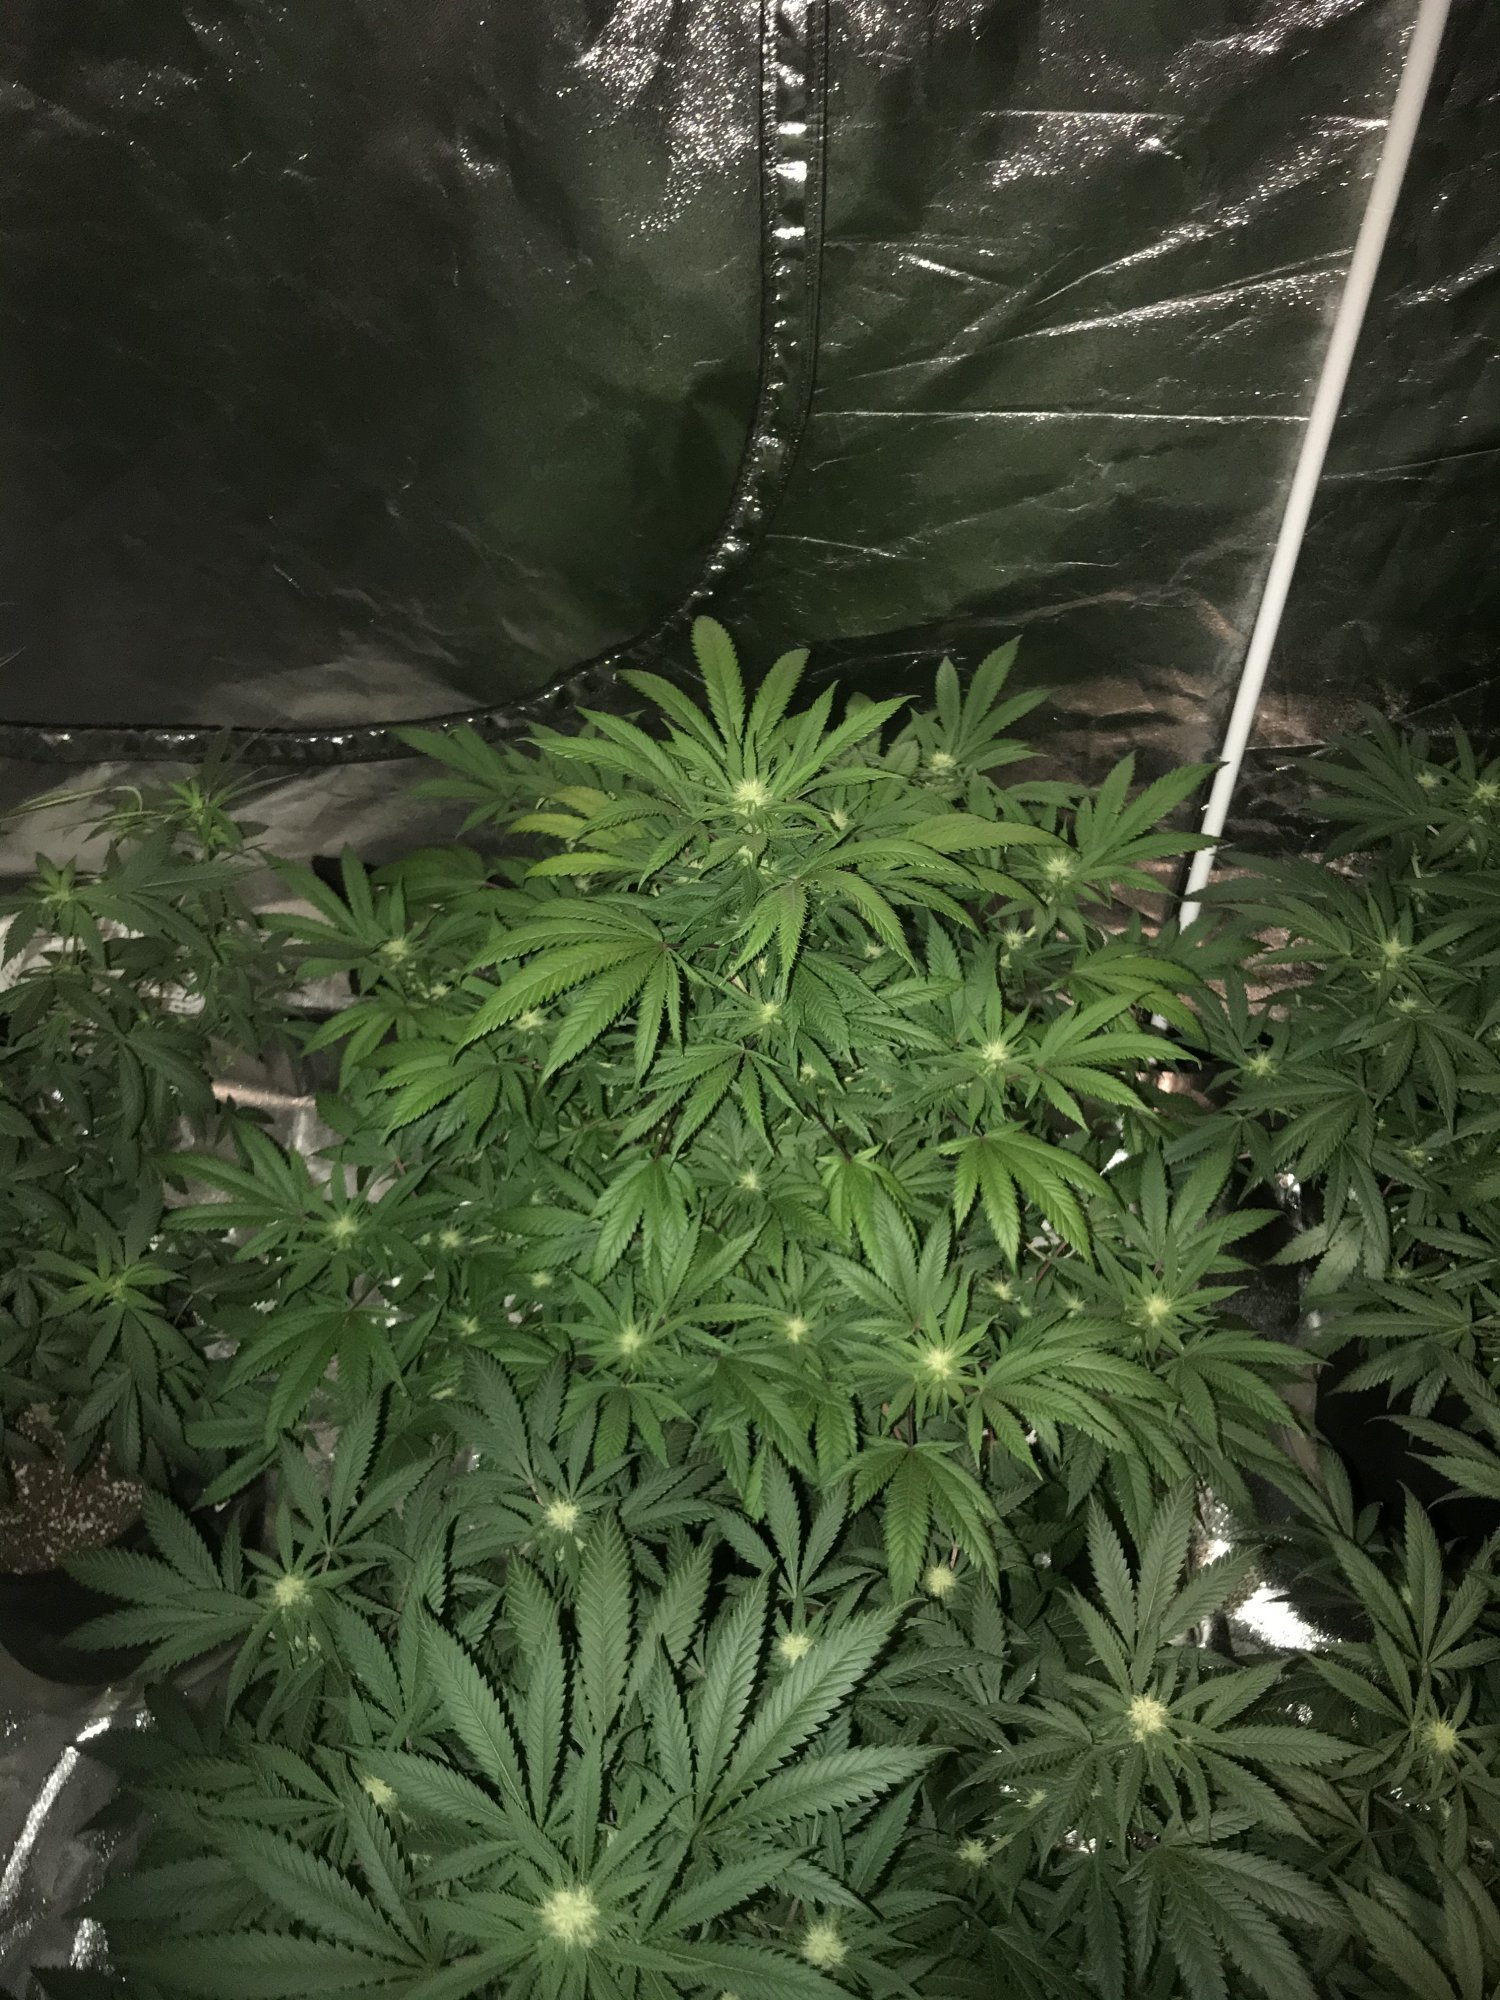 Slight yellowing of fan leaves during flower